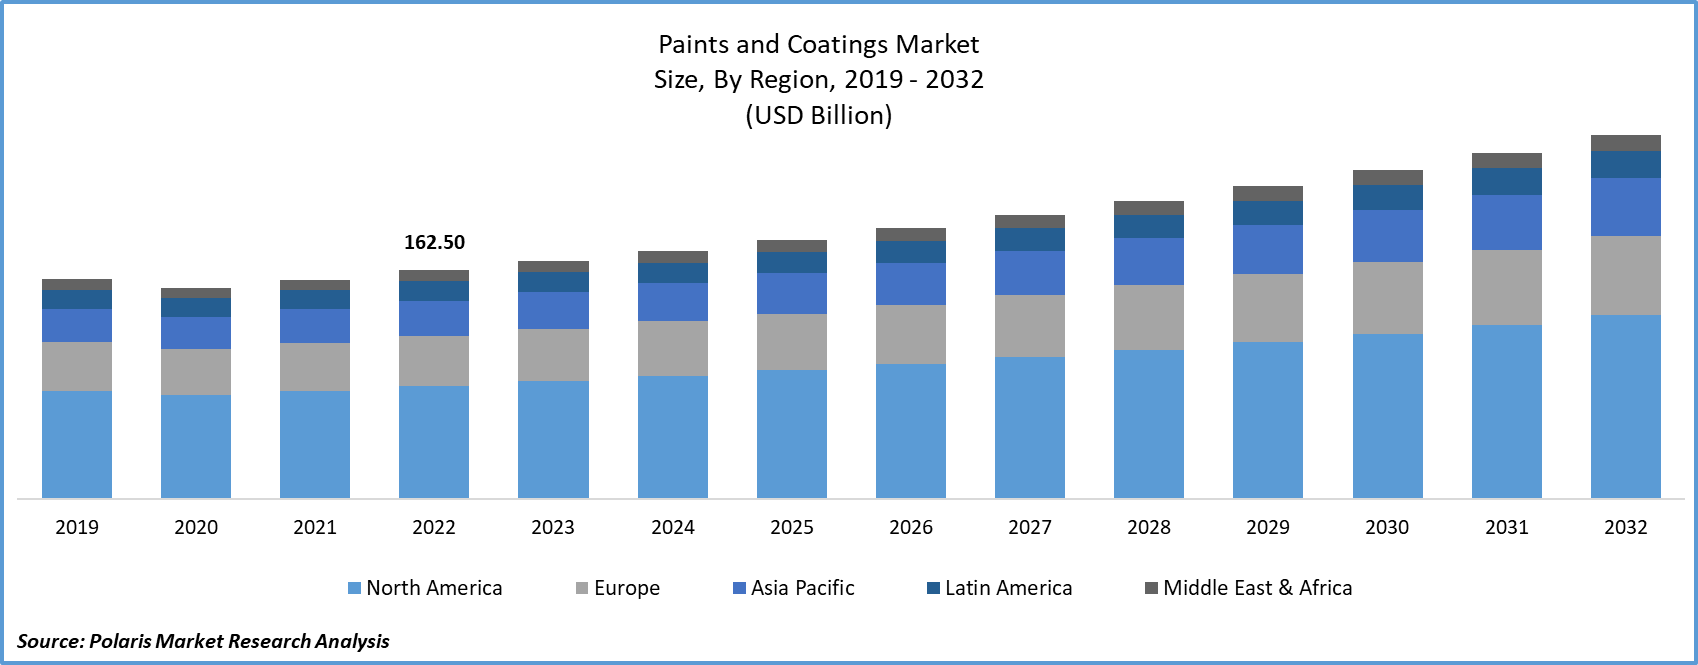 Paints and Coatings Market Size